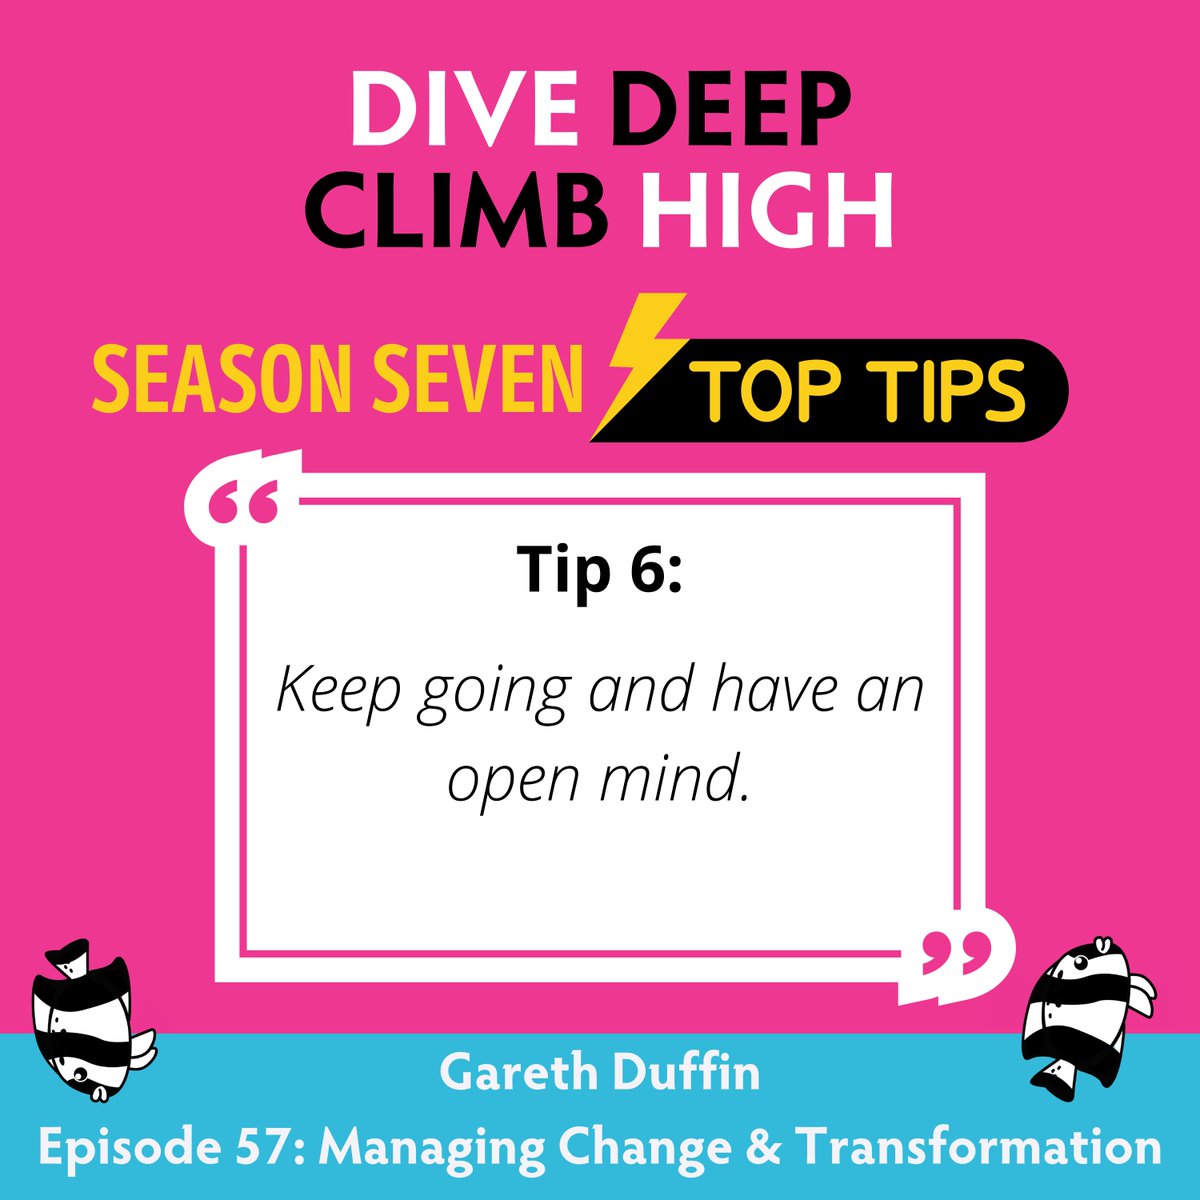 This week I continue to share my favourite #leadershiptips from Season 7 of the Dive Deep, Climb High podcast. 🎧Listen to Gareth Duffin from @MethodAvenue dive deep into how best to manage #transformation & #change: bit.ly/3YfgcjO #highereducationleadership #podcast